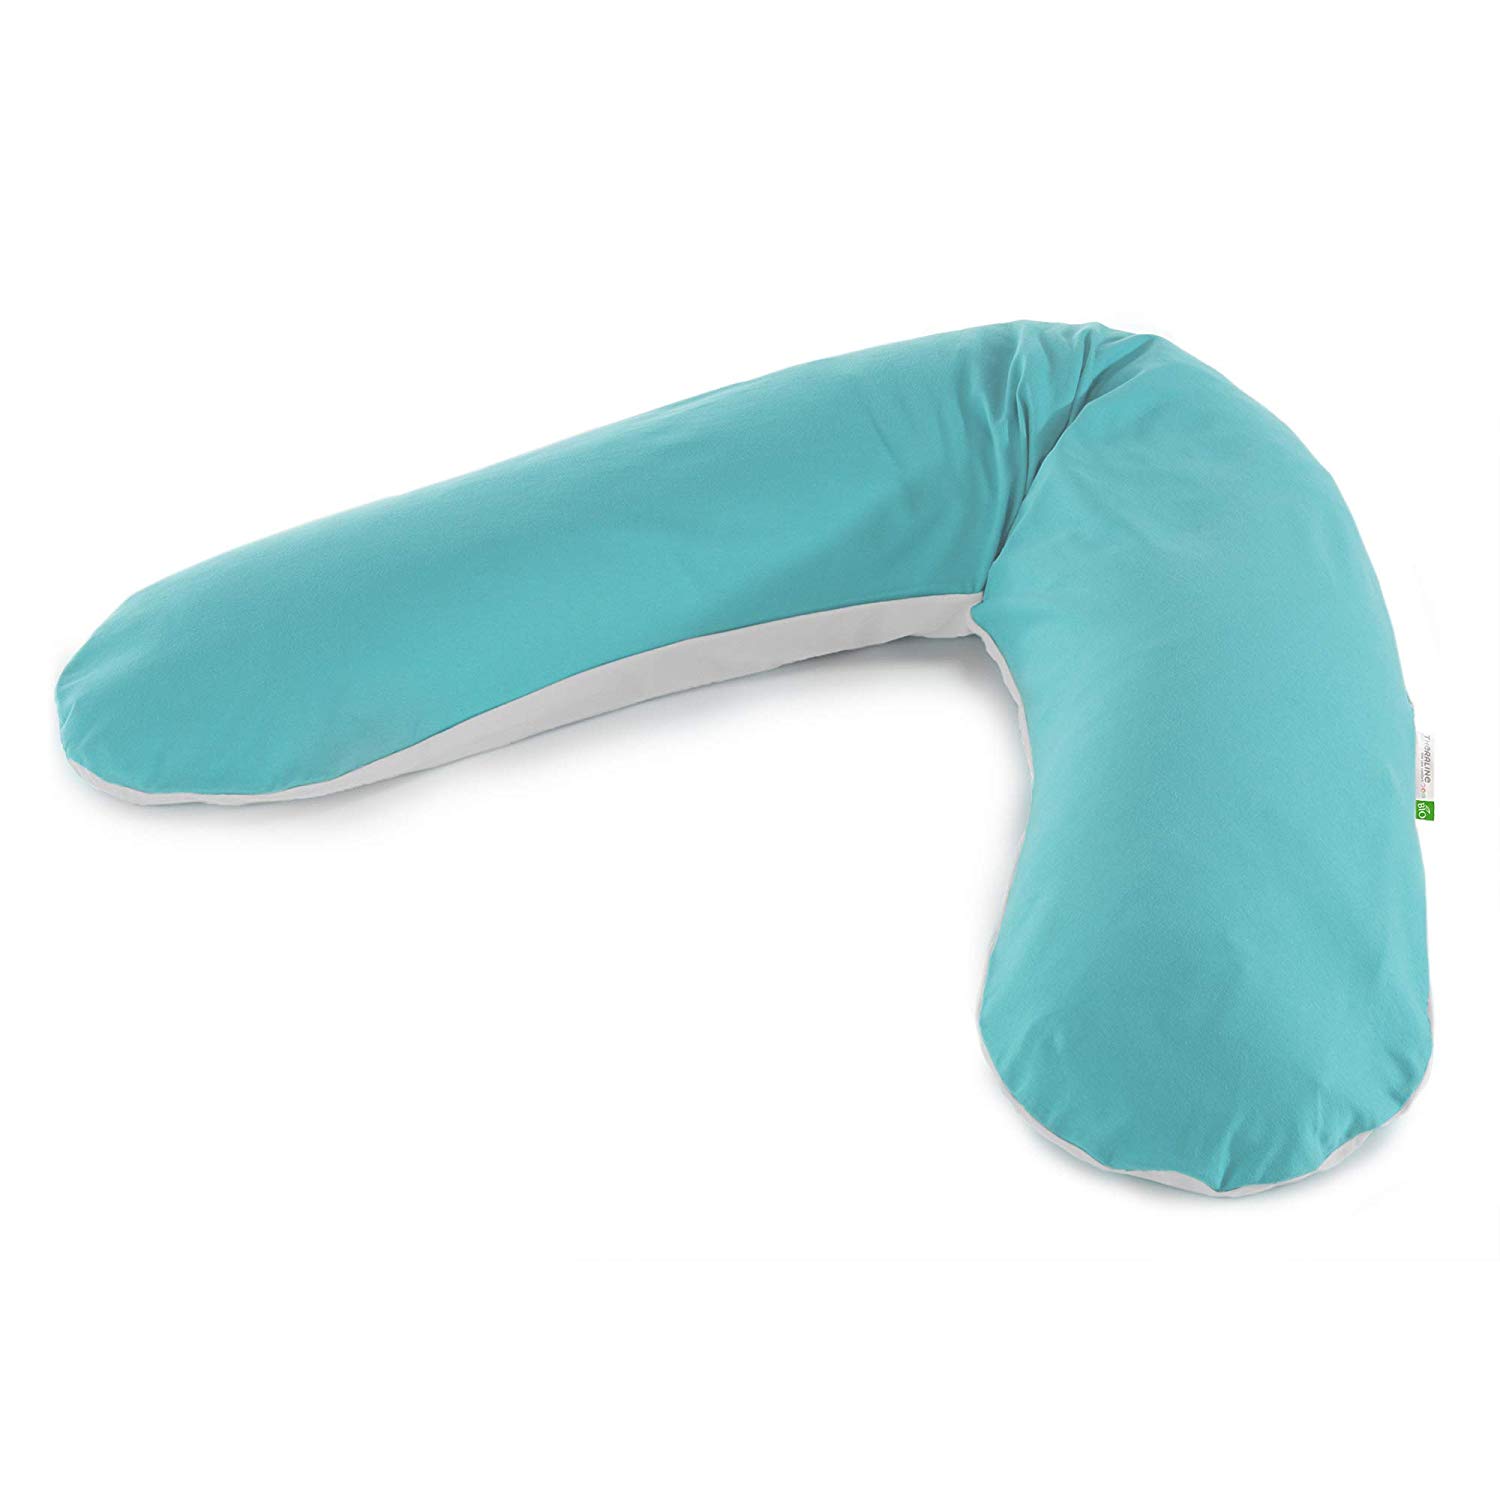 Theraline Original Theraline Nursing Pillow with Outer Cover – 100% Organic Cotton – Jersey 94 Turquoise/Ivory